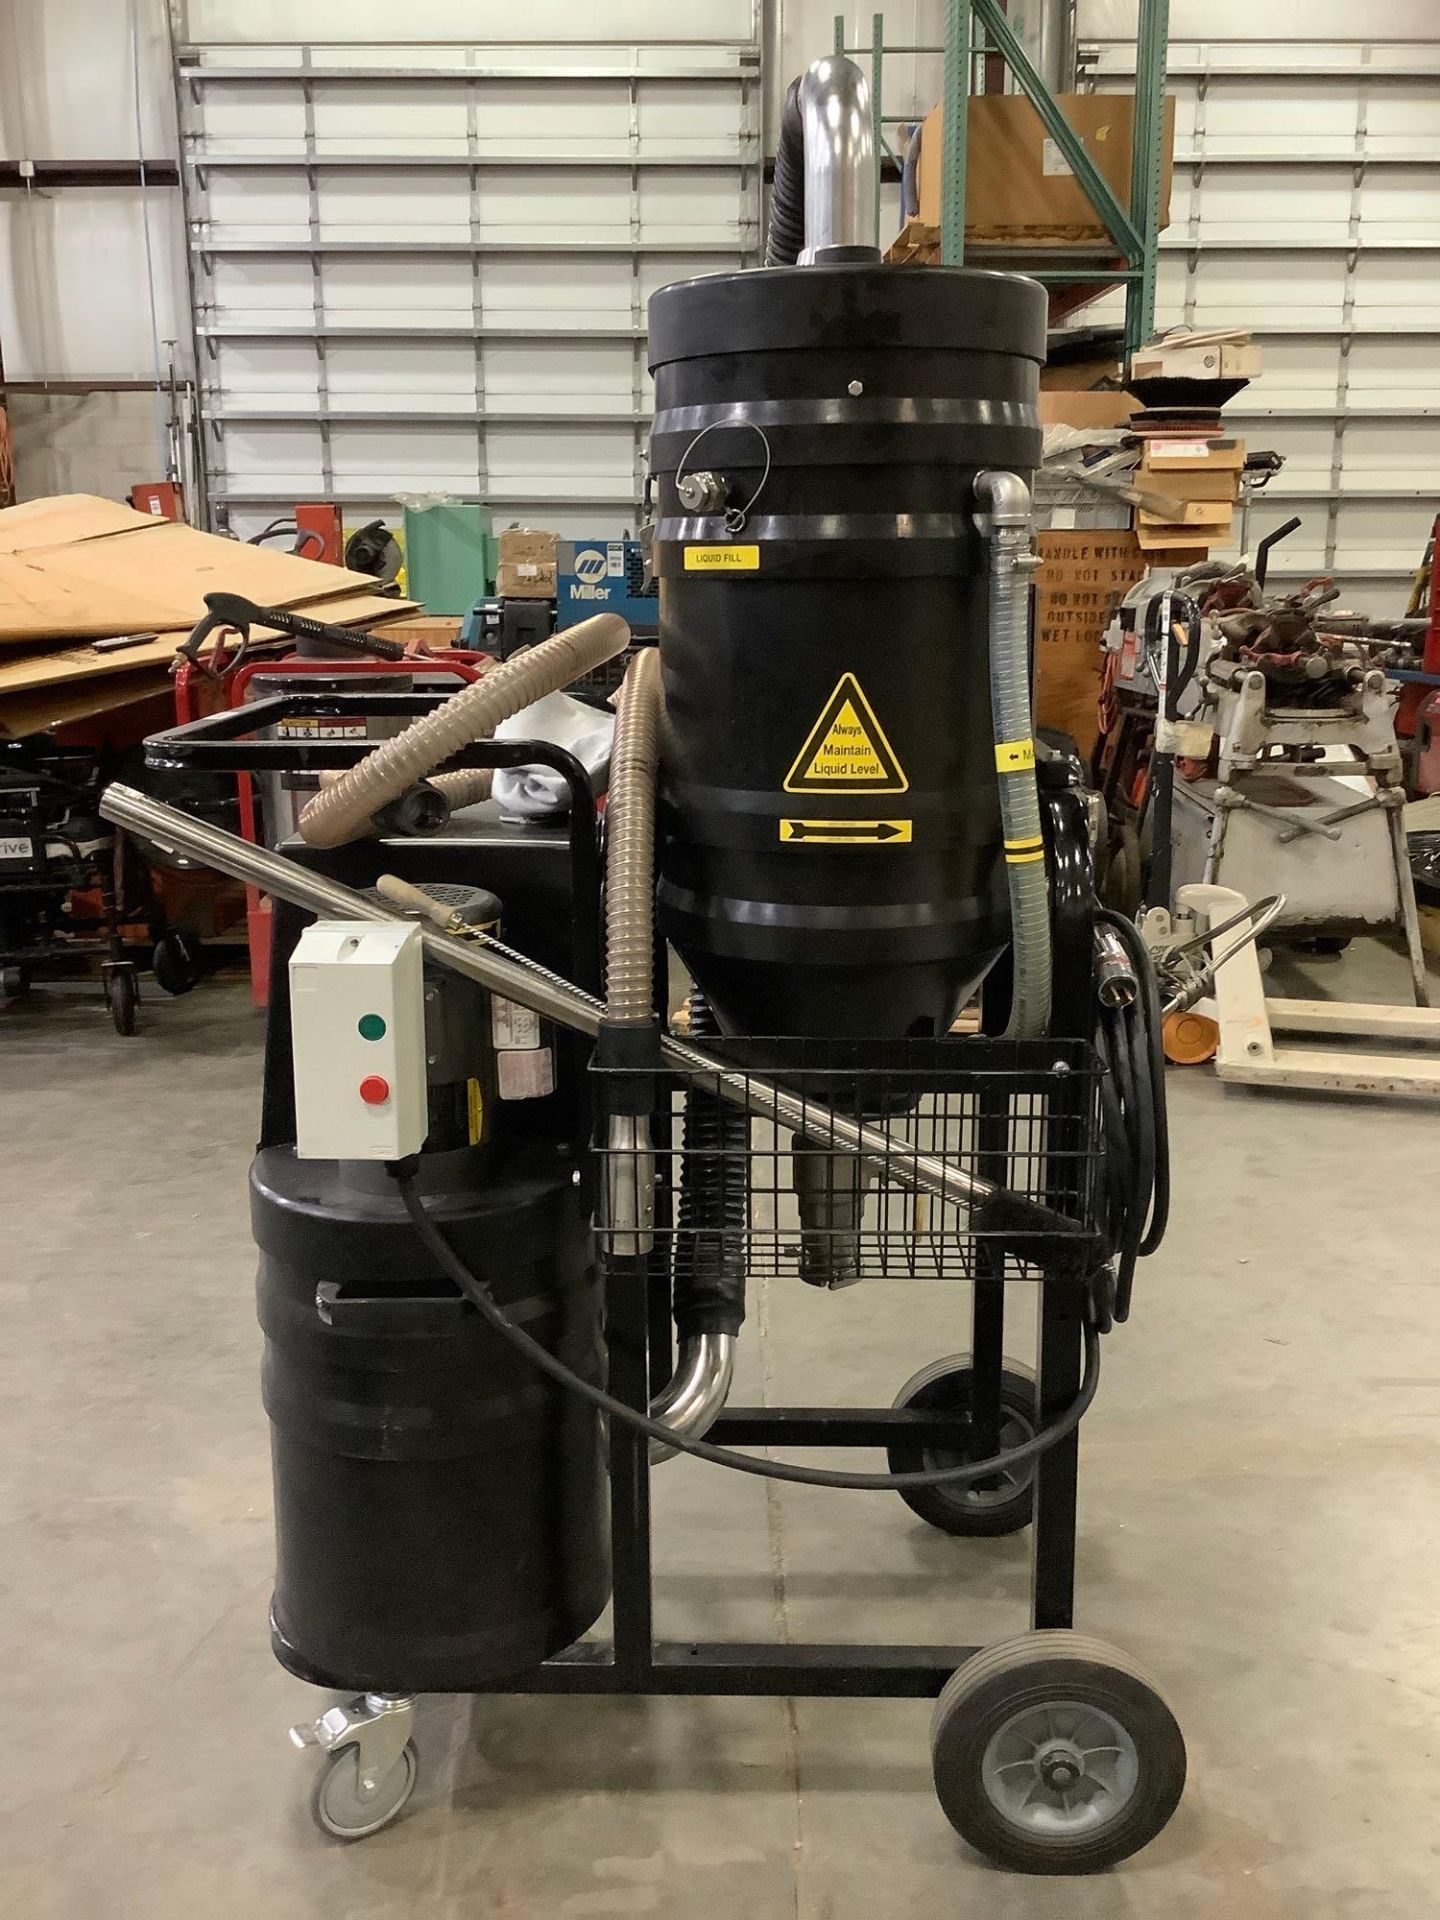 RUWAC IMMERSION SEPARATION VACUUM MODEL NA35HD, BALDOR RELIANCER MOTOR, PHASE 1, APPROX 110 VOLTS, A - Image 6 of 11